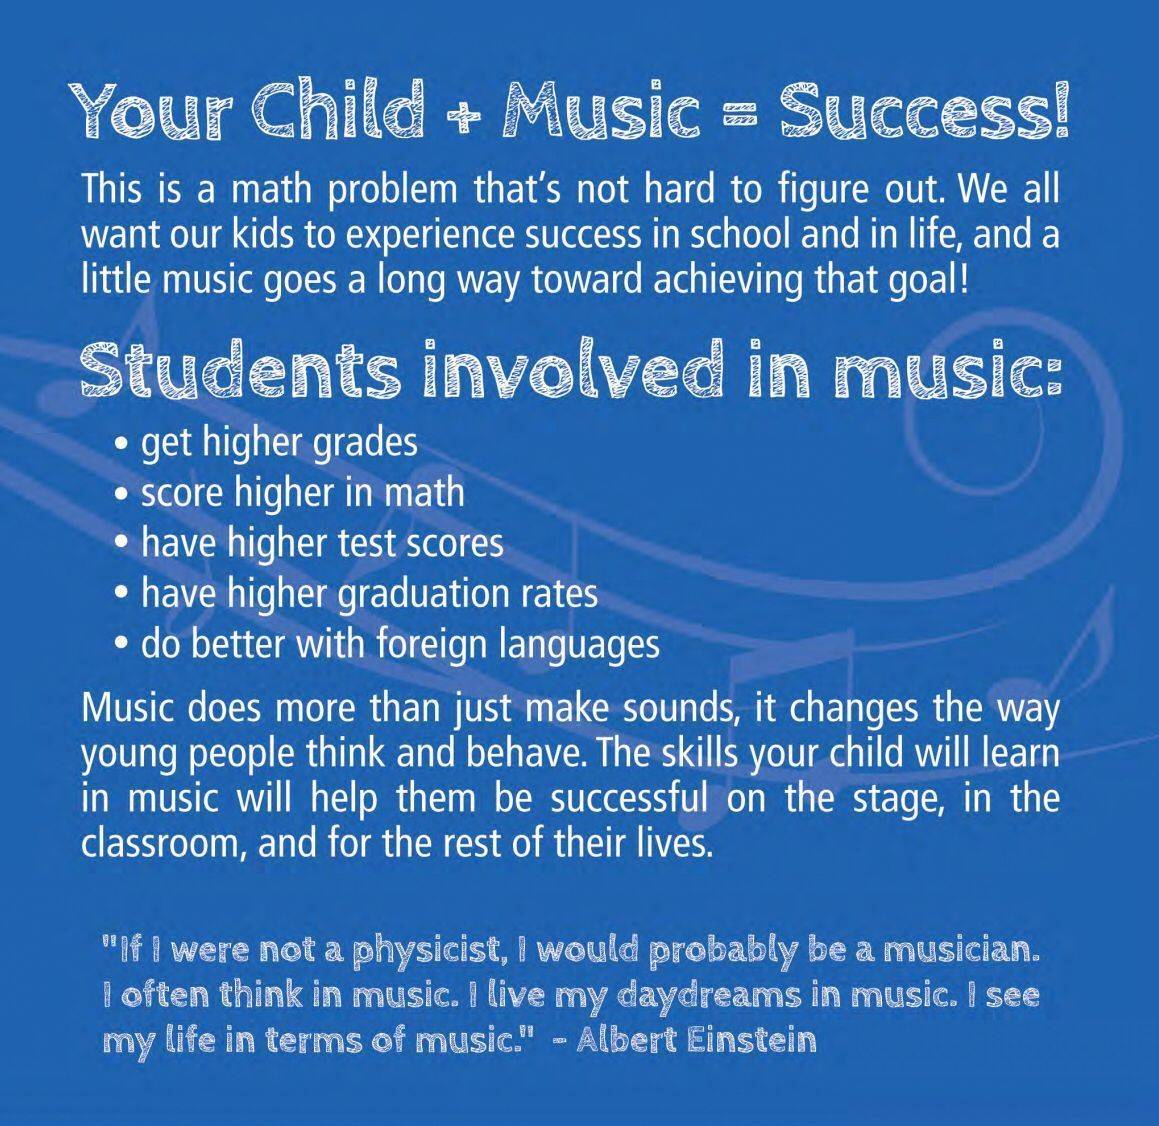 Need information to share with the parents of your incoming music students? 🎶 Look no further!

buff.ly/2mKFXqC